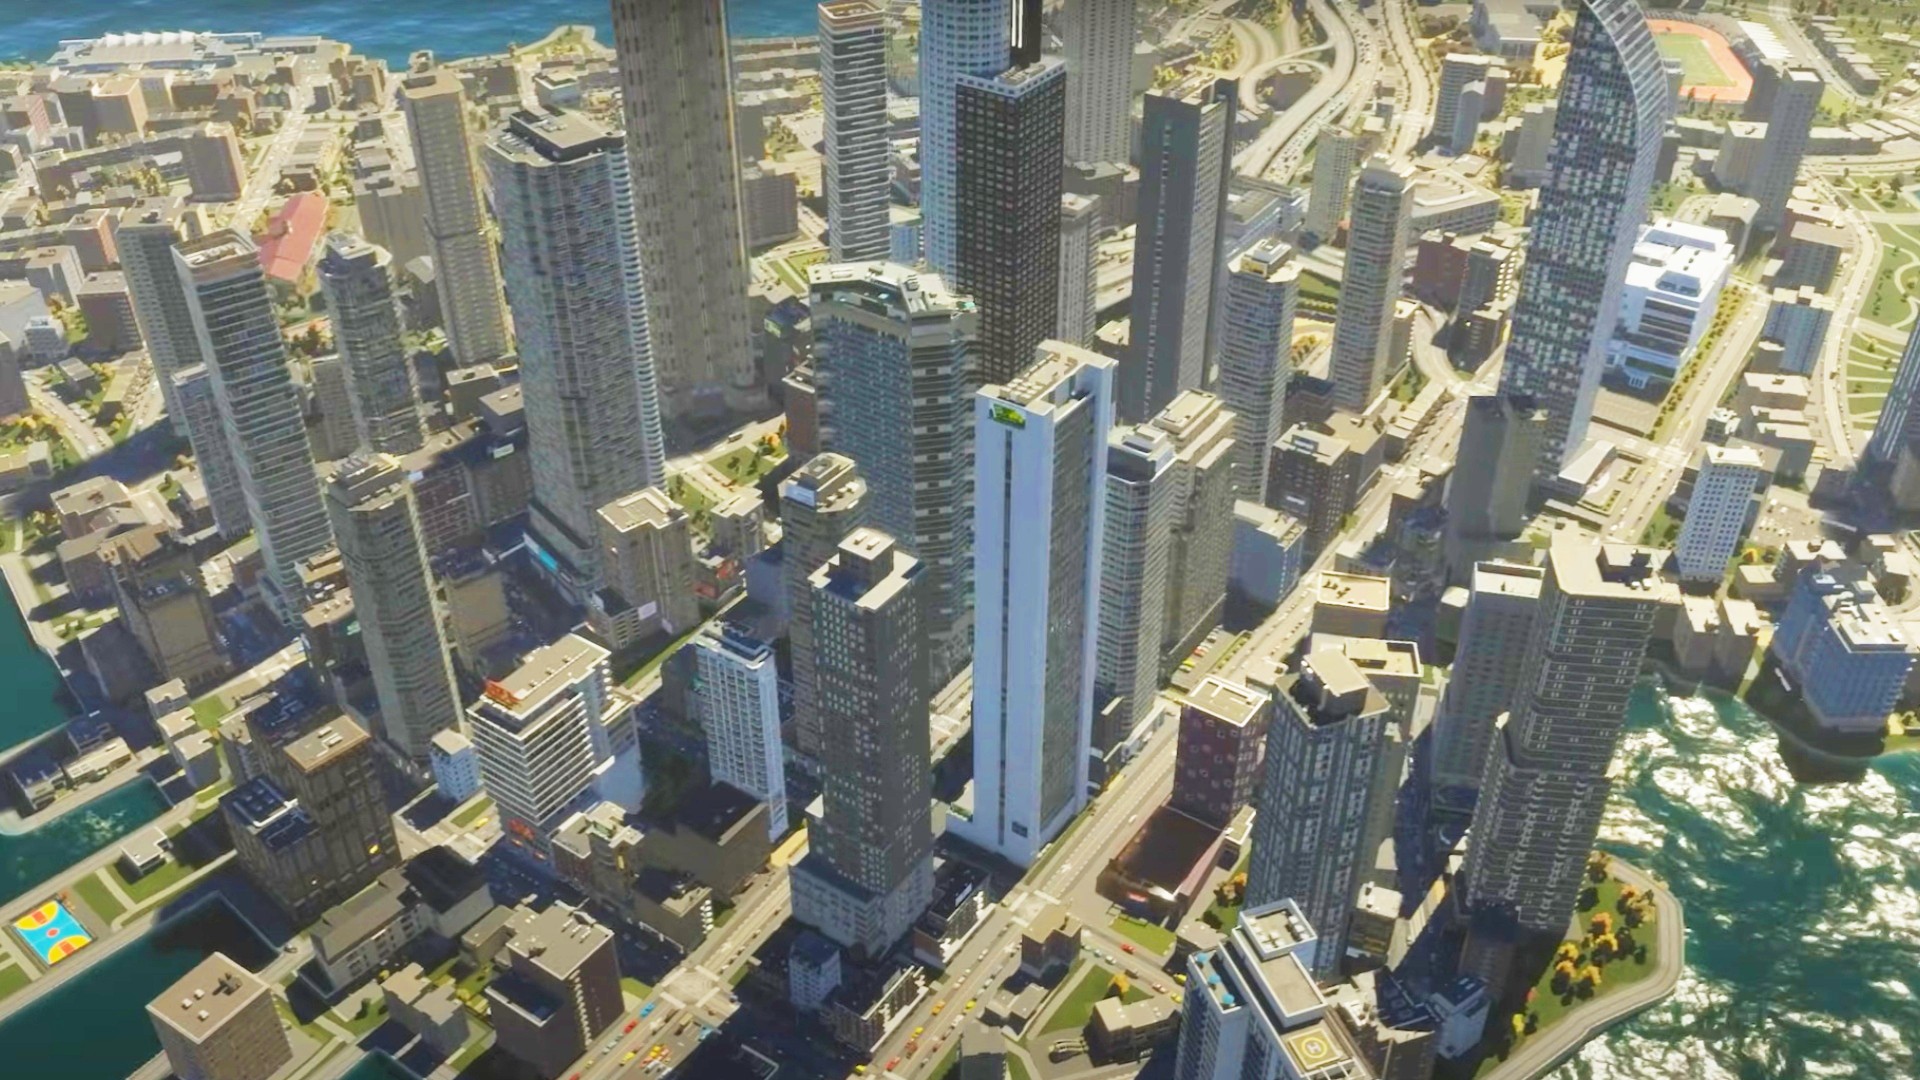 The Cities Skylines 2 economy is being completely rebuilt by CO